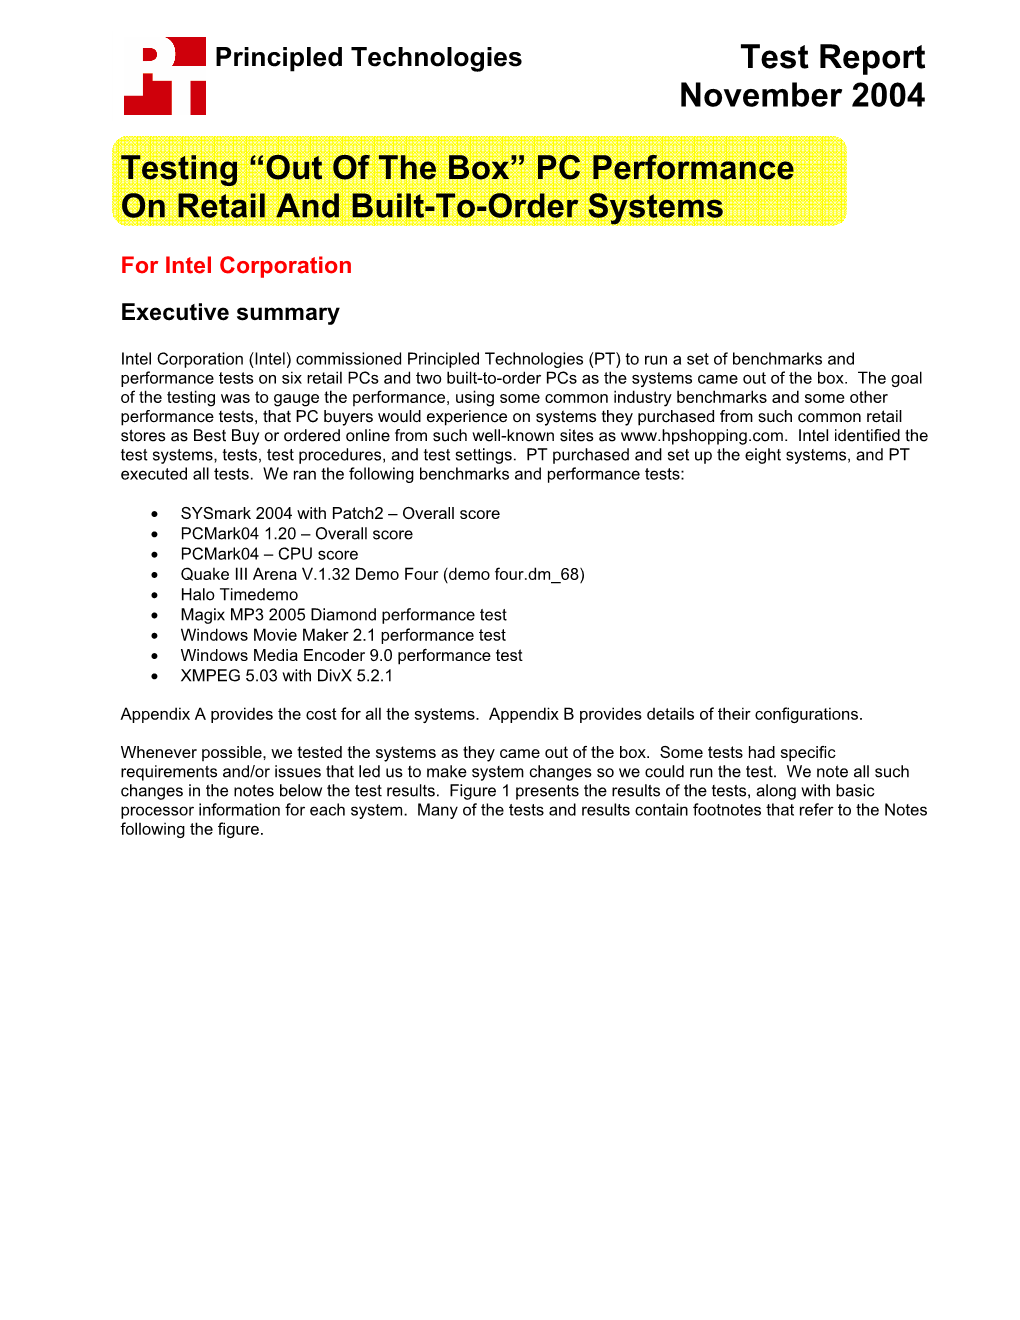 PC Performance on Retail and Built-To-Order Systems